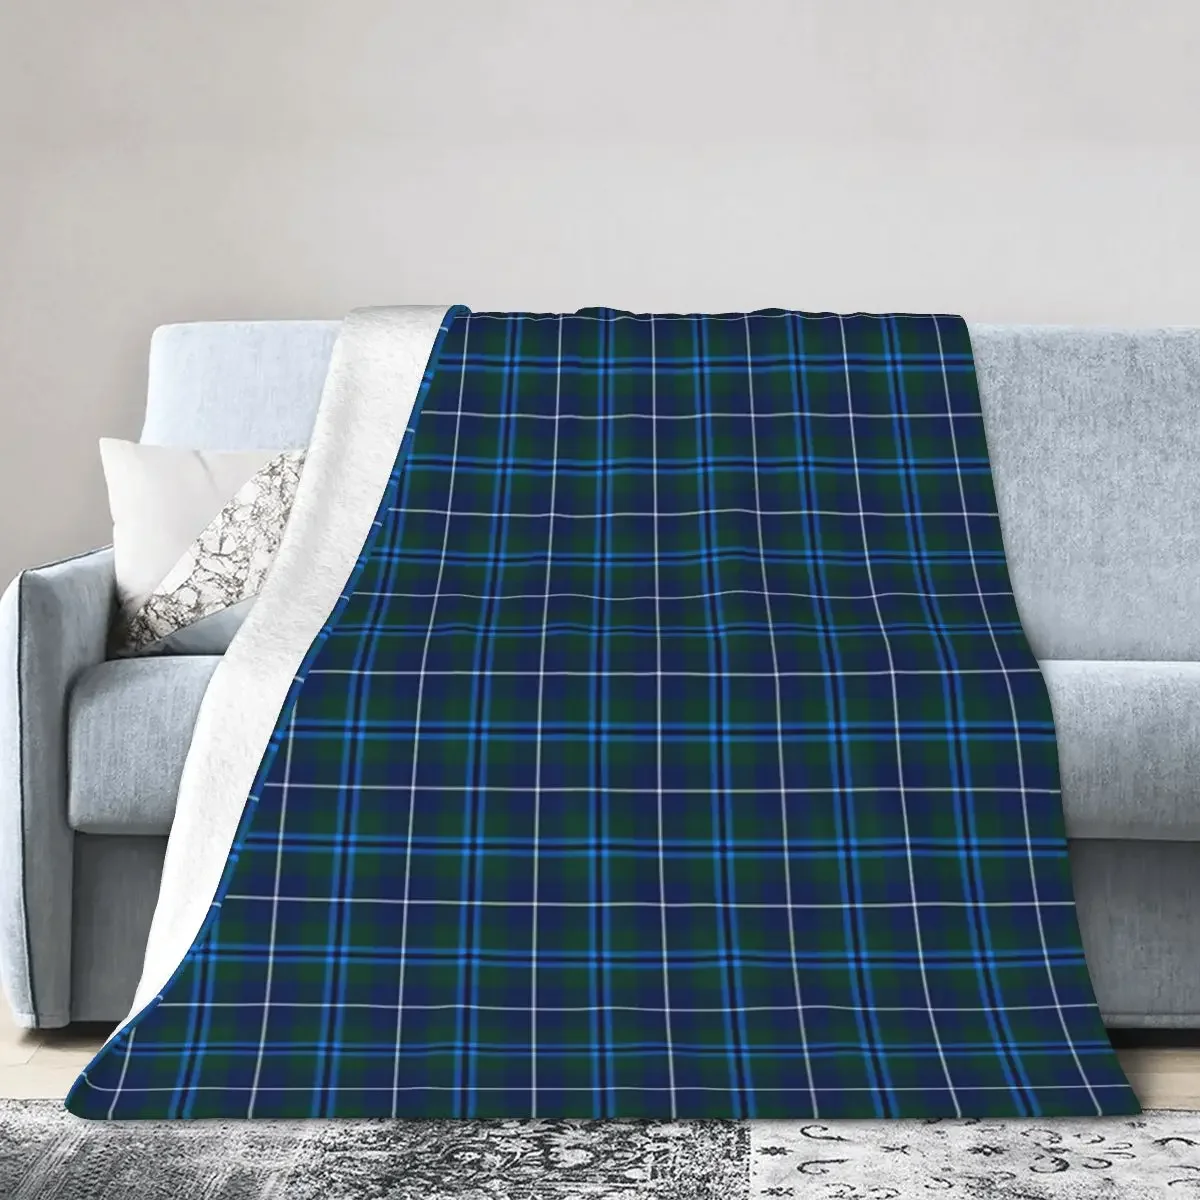 

Clan Douglas Tartan Blankets Soft Warm Flannel Throw Blanket Bedding for Bed Living room Picnic Travel Home Couch